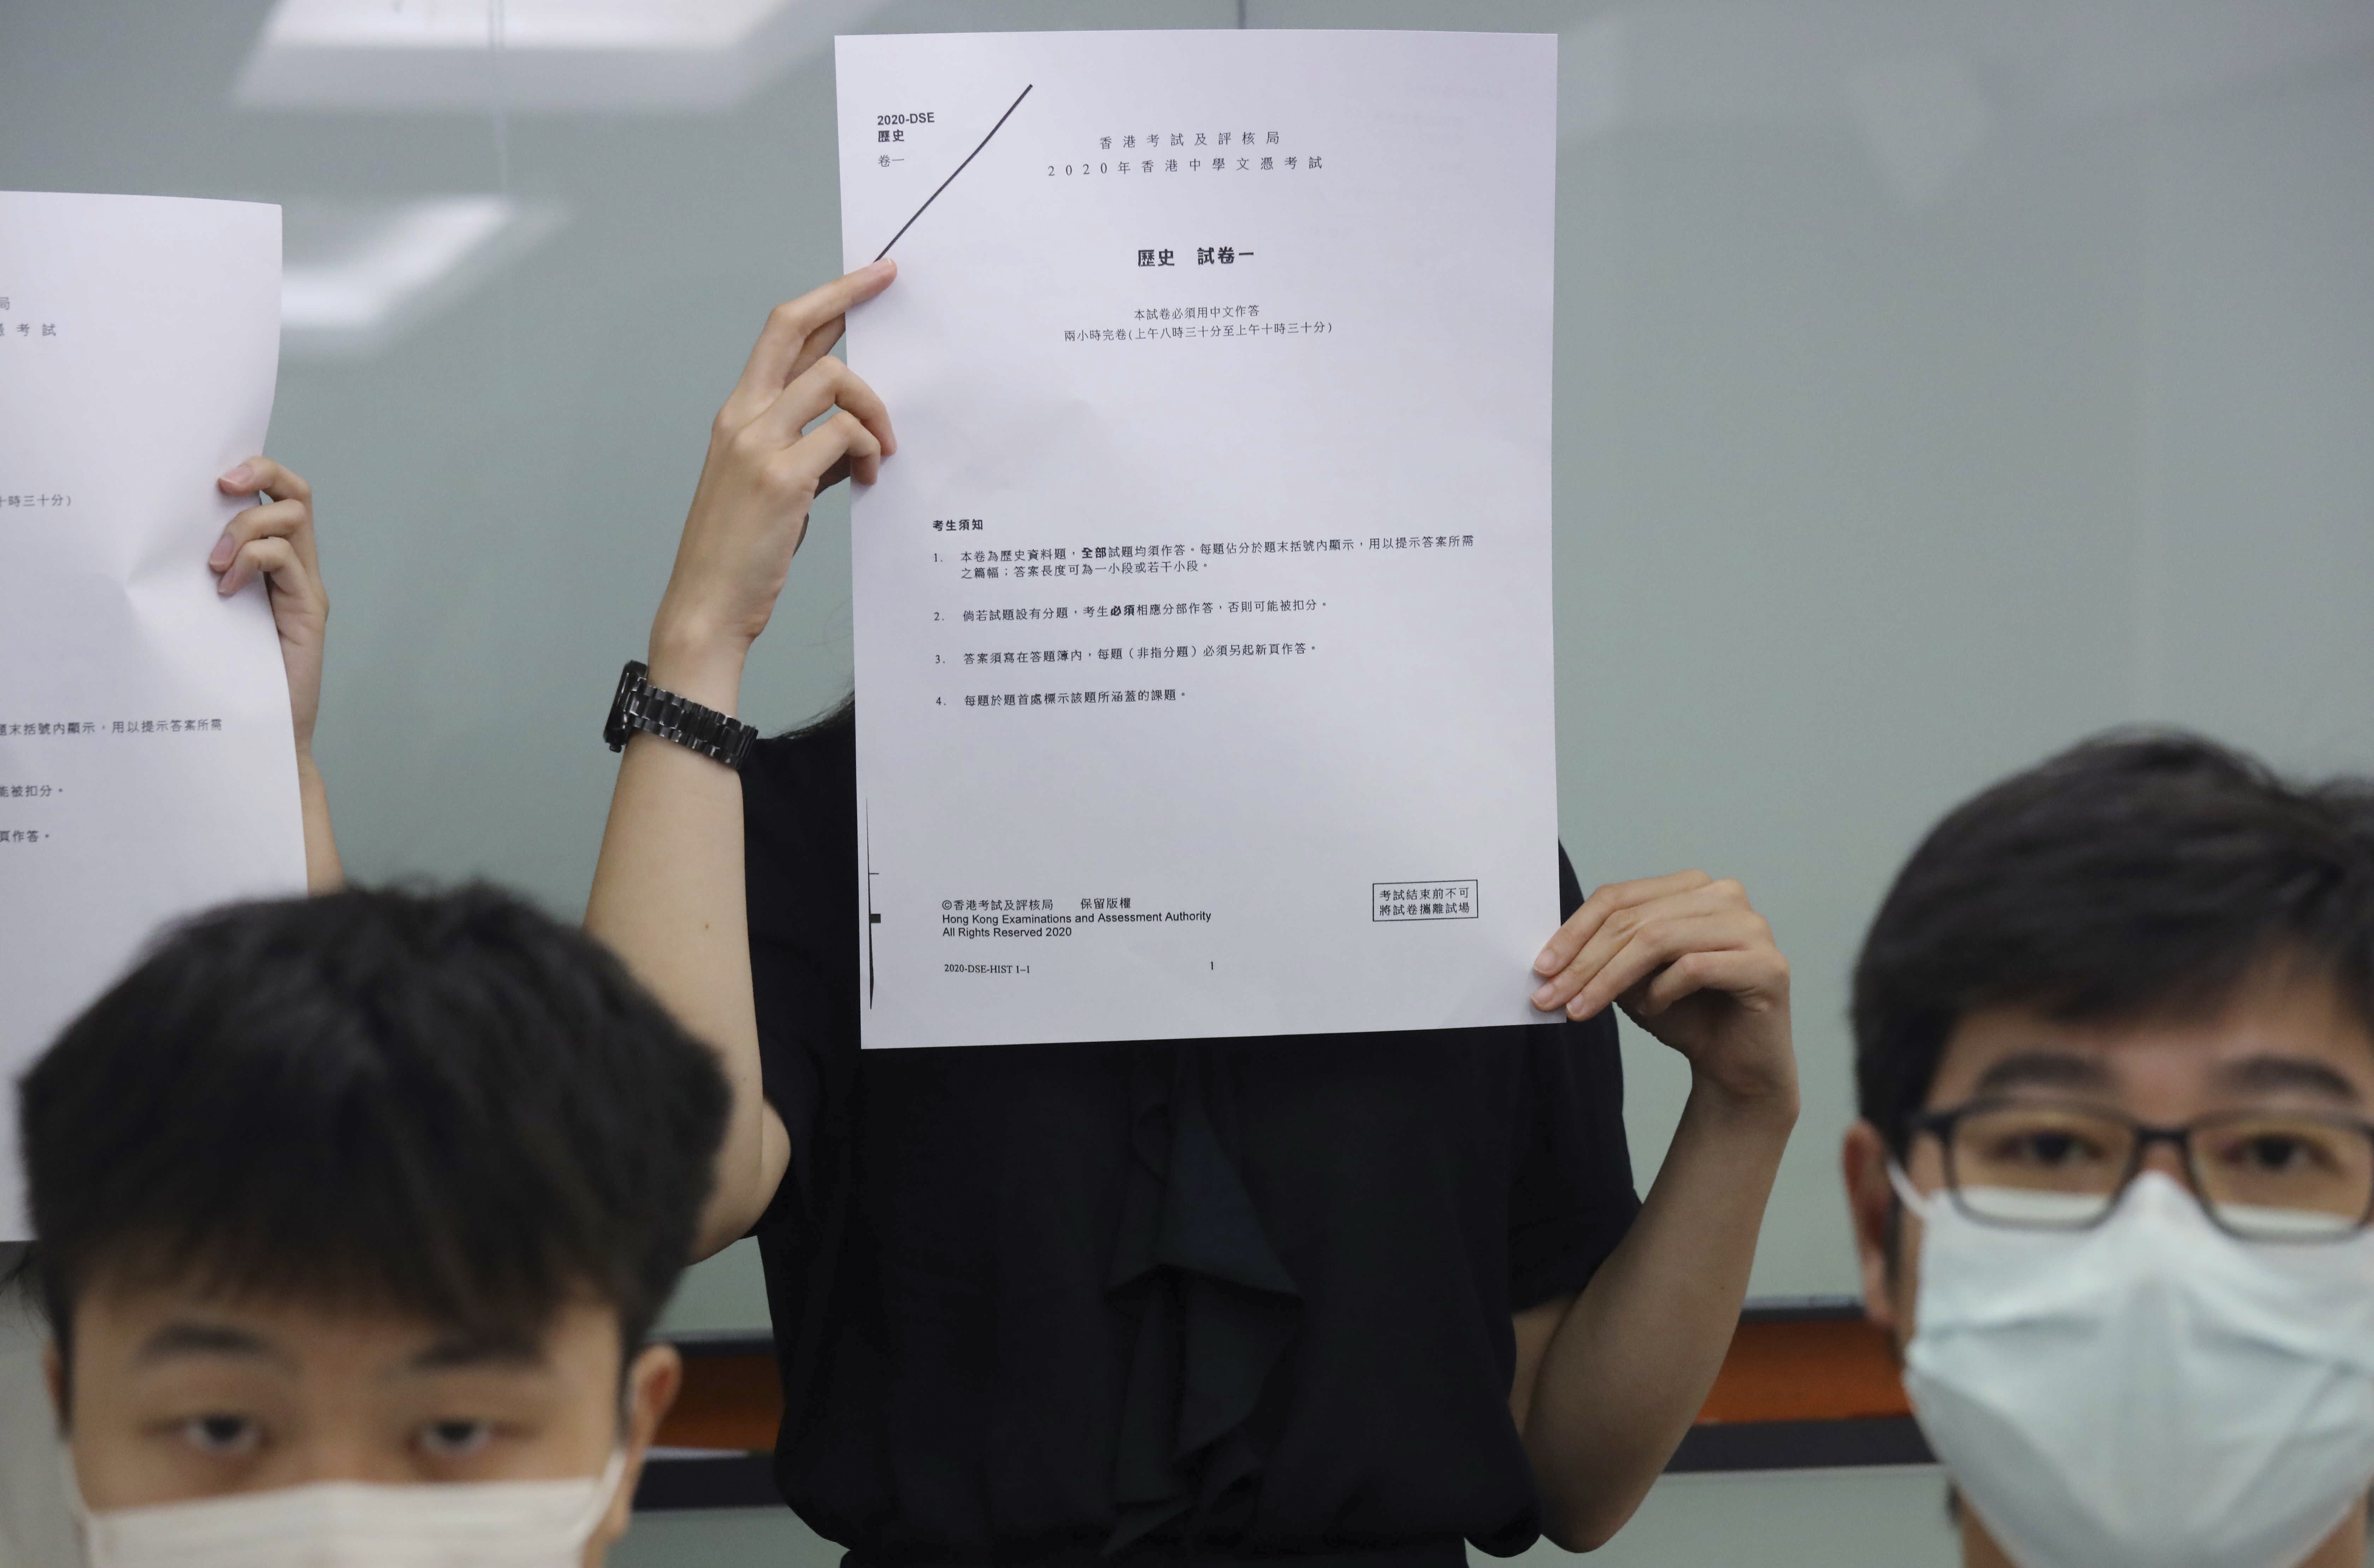 Teachers of Chinese history hold a press conference to respond to the controversial exam question from a recent Diploma of Secondary Education history paper at the Hong Kong Professional Teachers’ Union office in Mong Kok. Photo: K. Y. Cheng